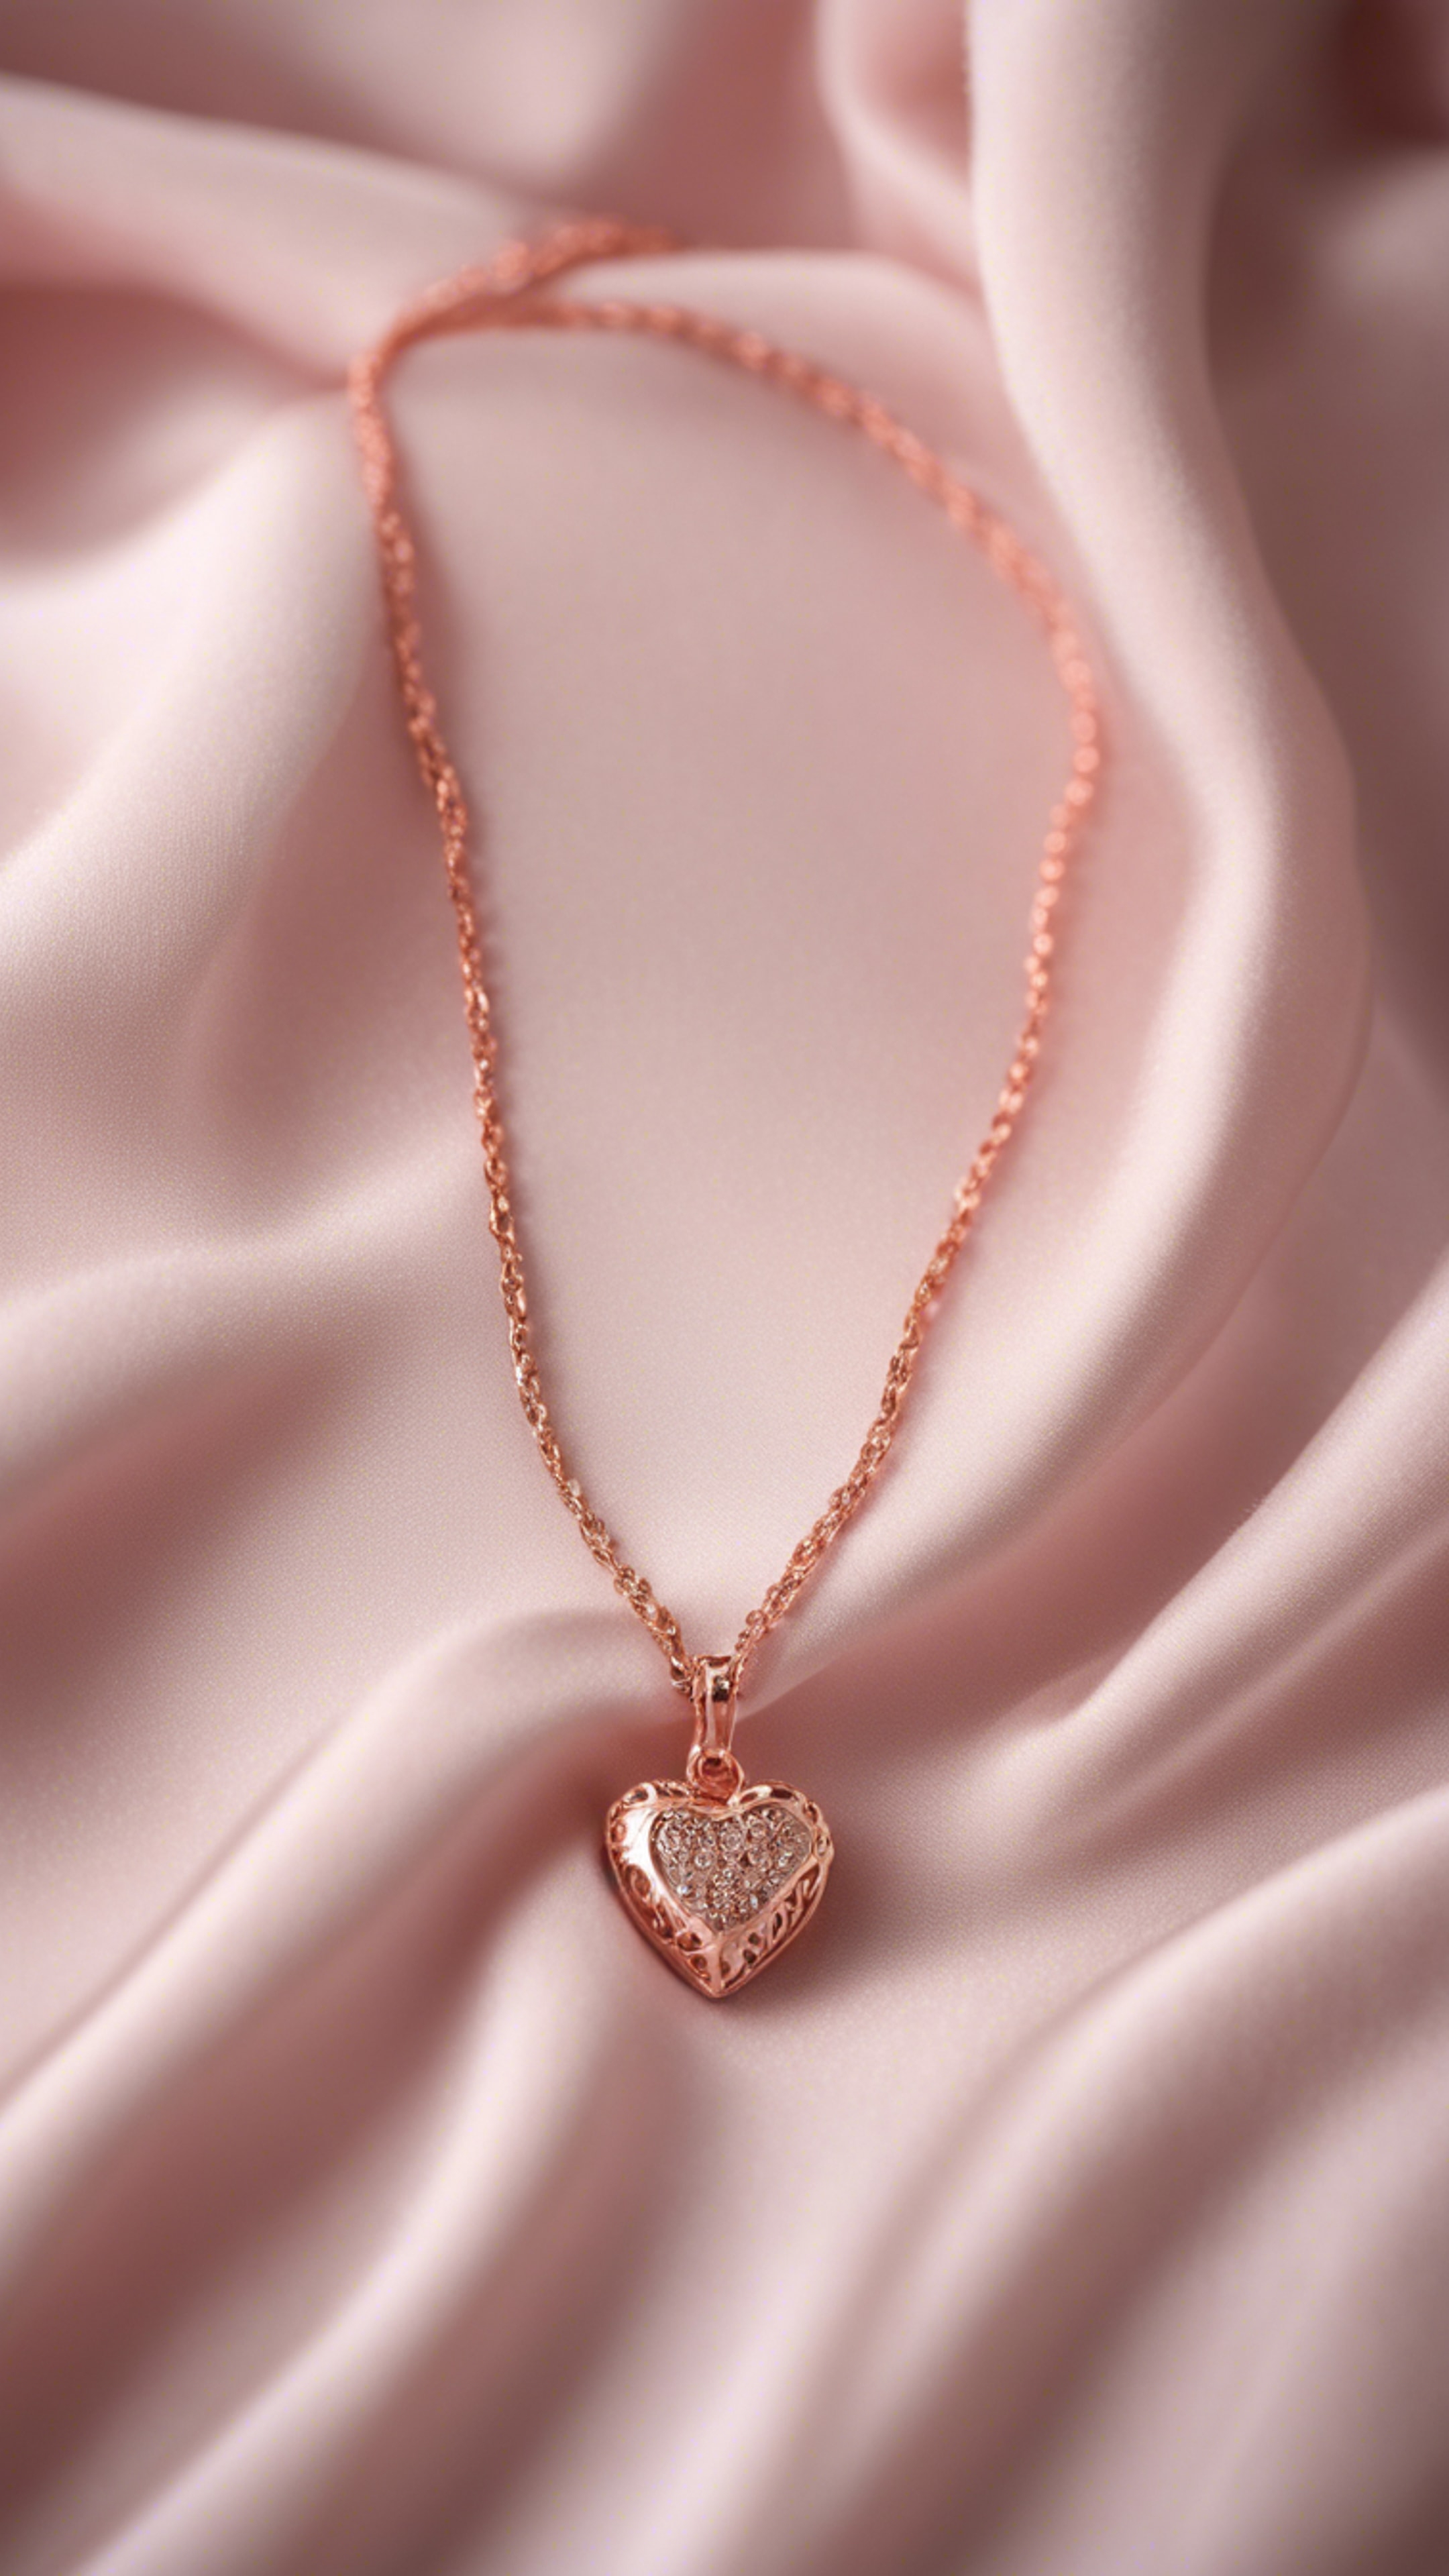 A delicate rose gold chain necklace with a small heart pendant, displayed on a soft pink satin fabric. Tapeta[1bffd5f9a0f0499fae91]